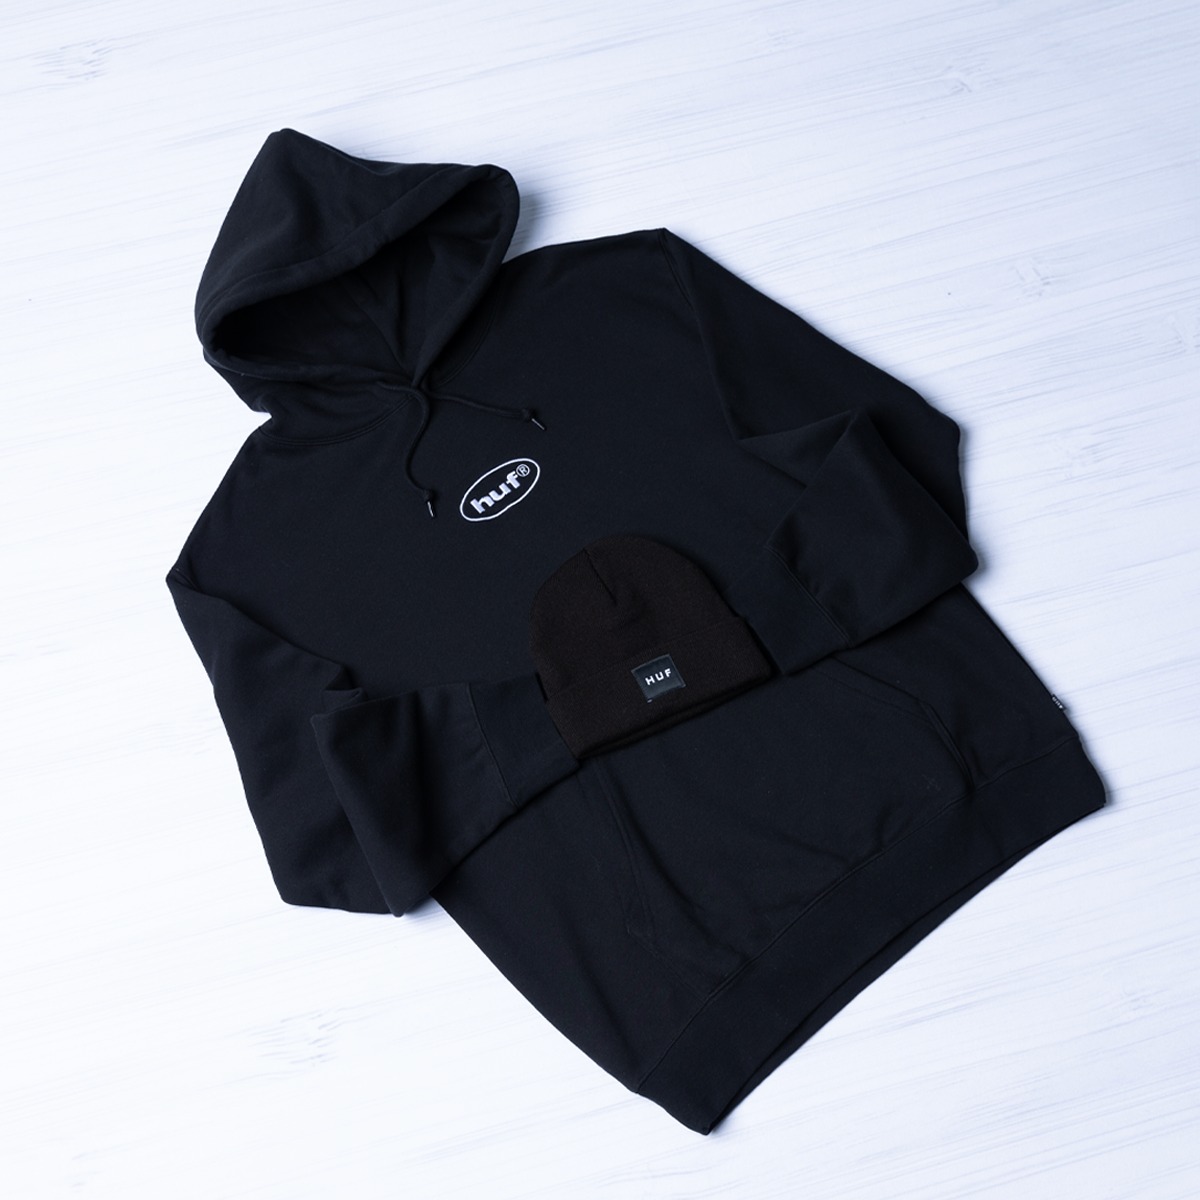 Elevate your street style with comfy hoodies *perfect for layering* & graphic tees from HUF collection. Check the collection here shop.sneakercage